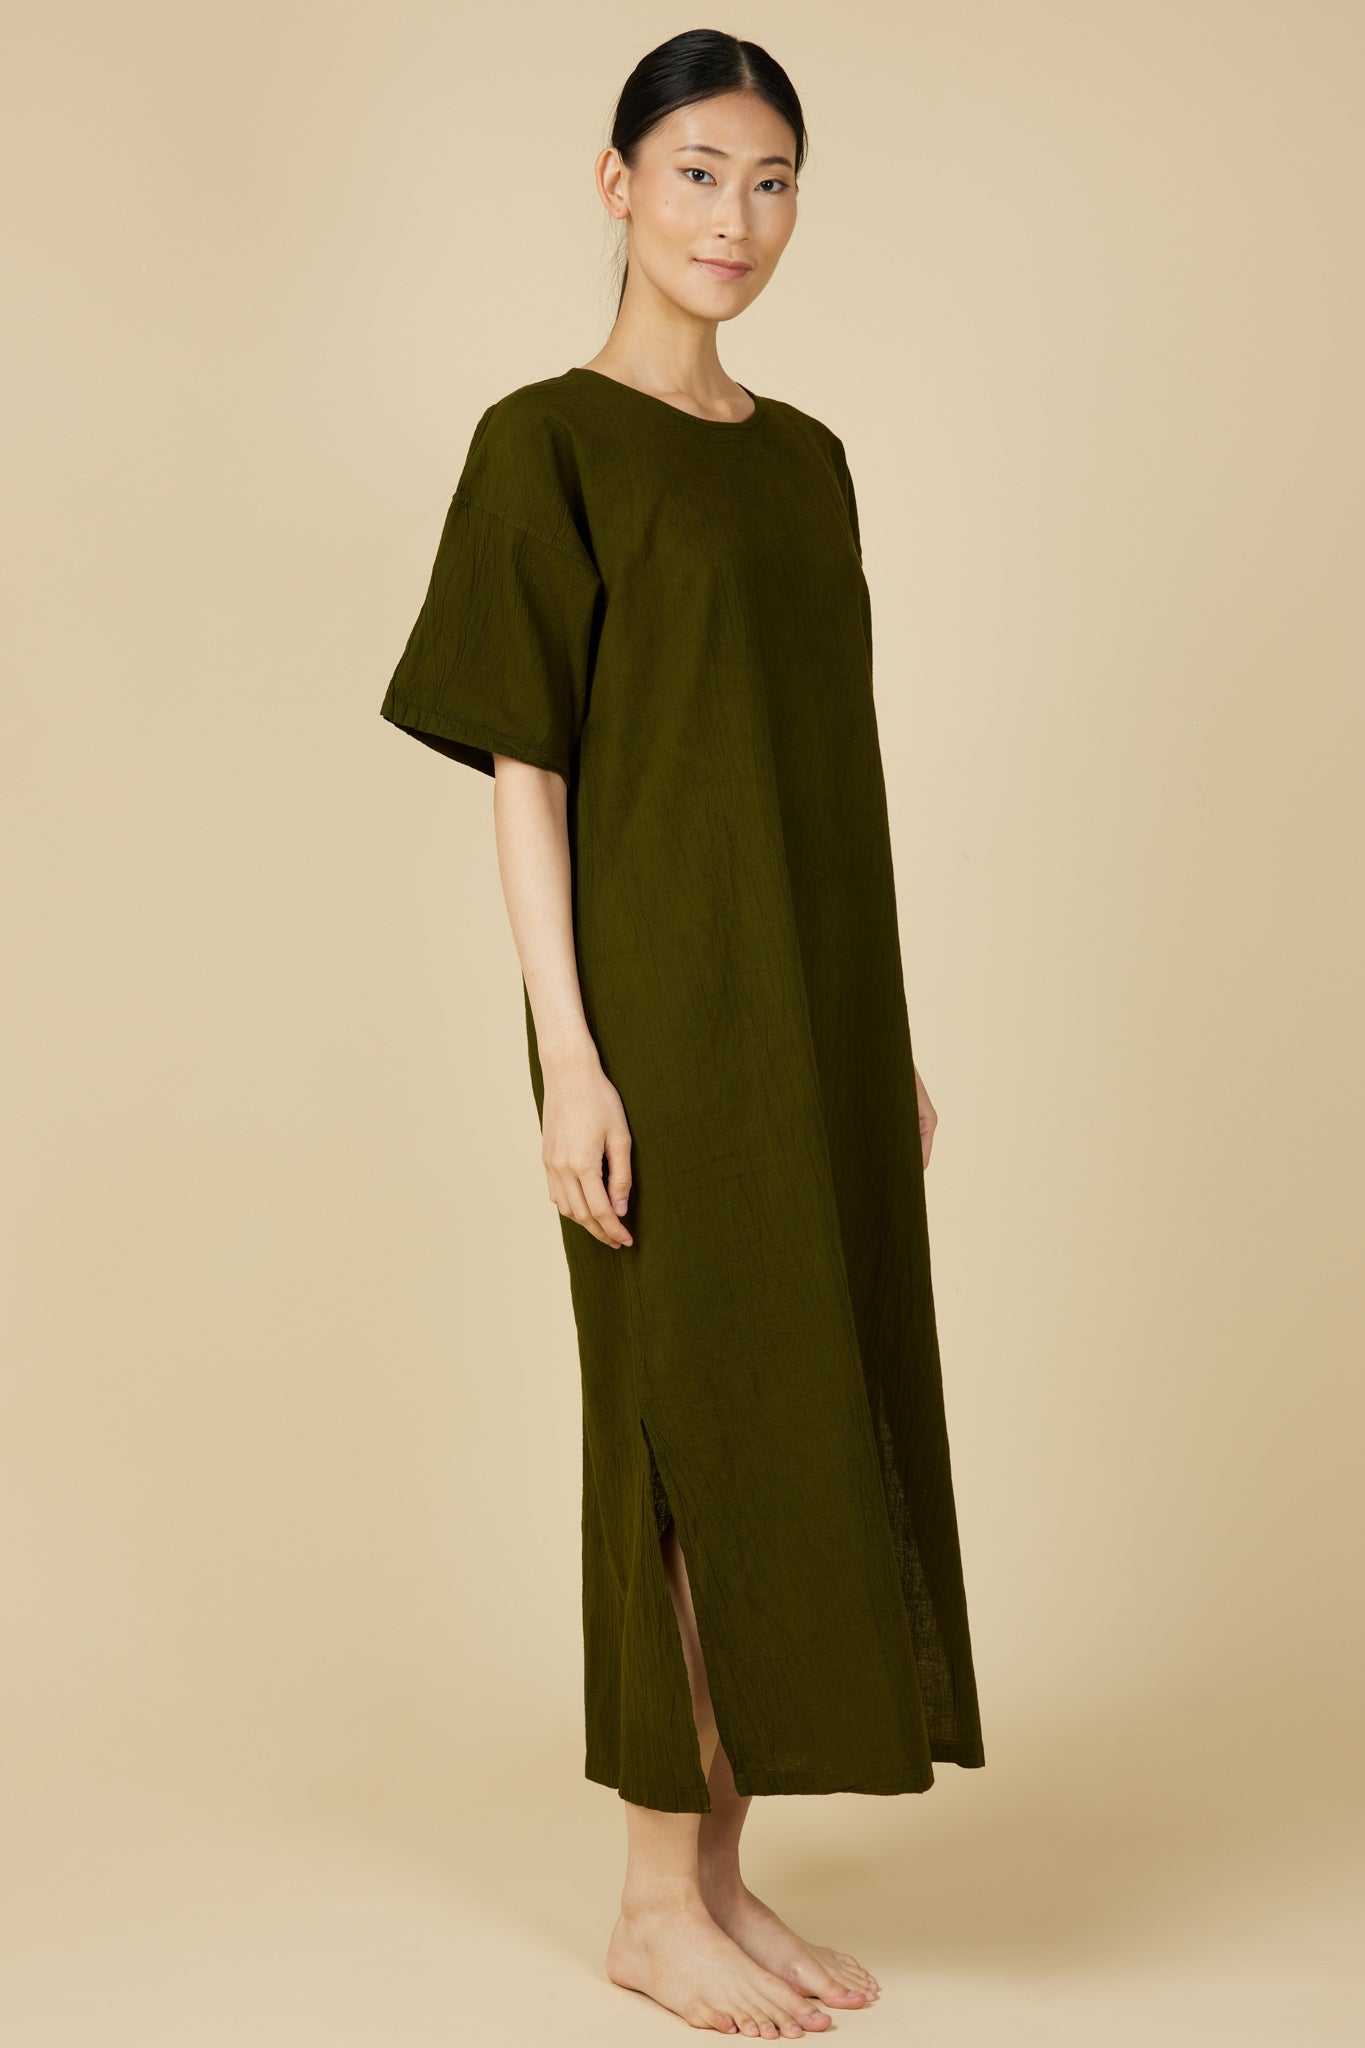 Hand Dyed Short Sleeve Dress in Army Green